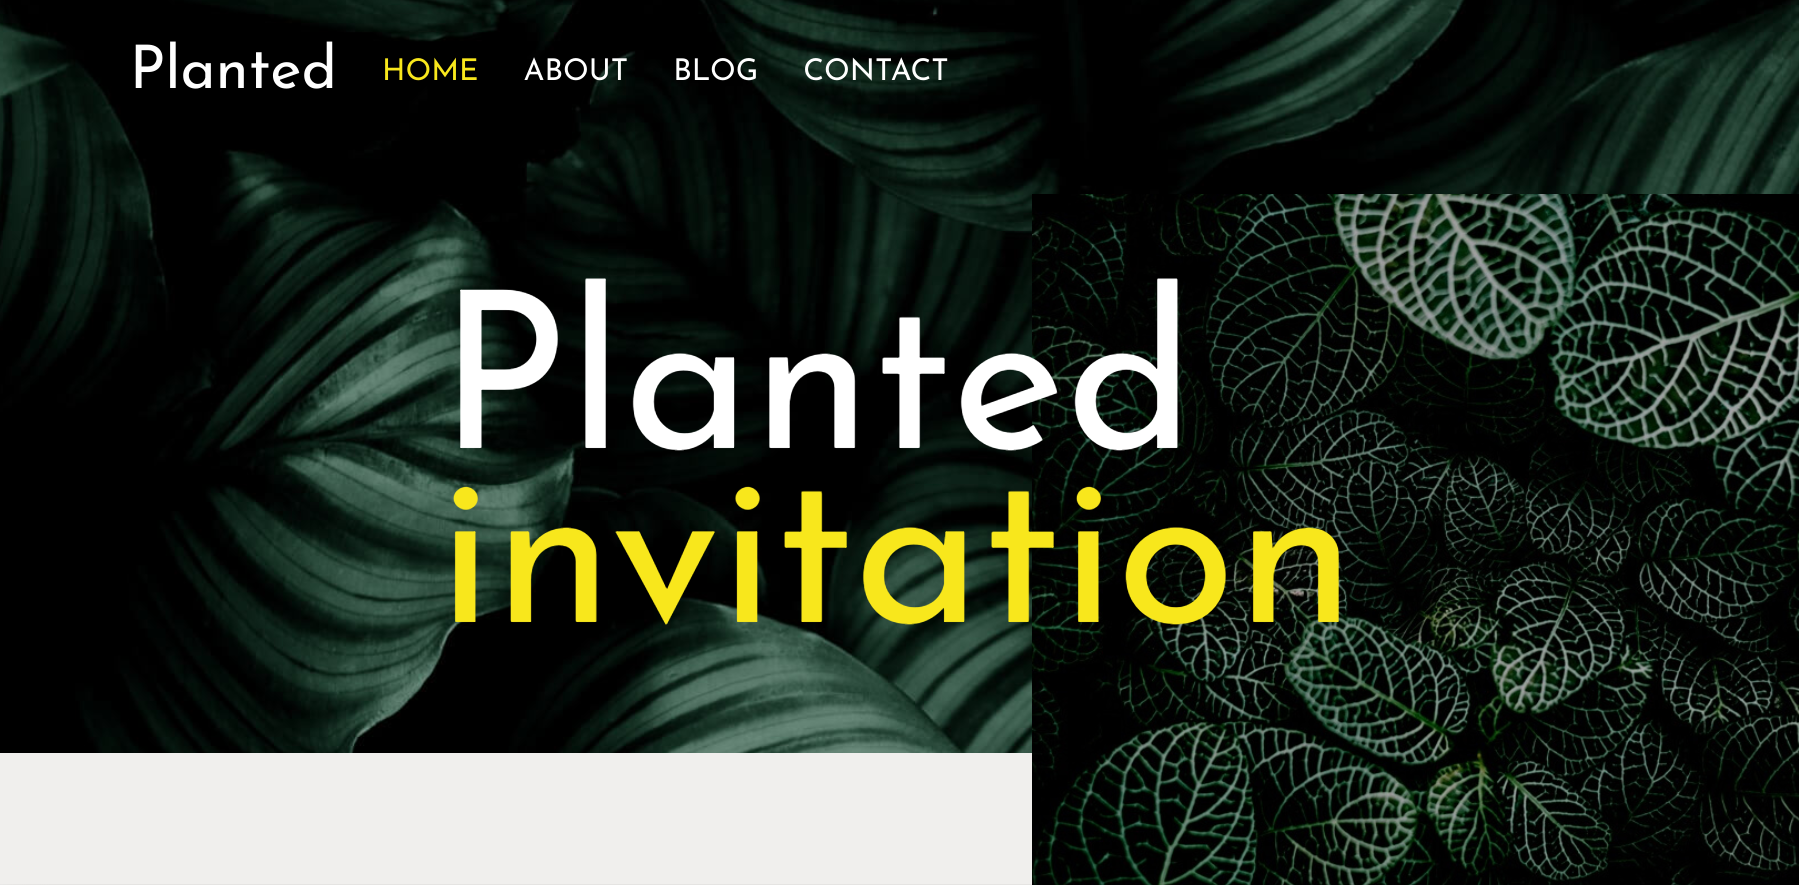 An image of the website 'Planted'